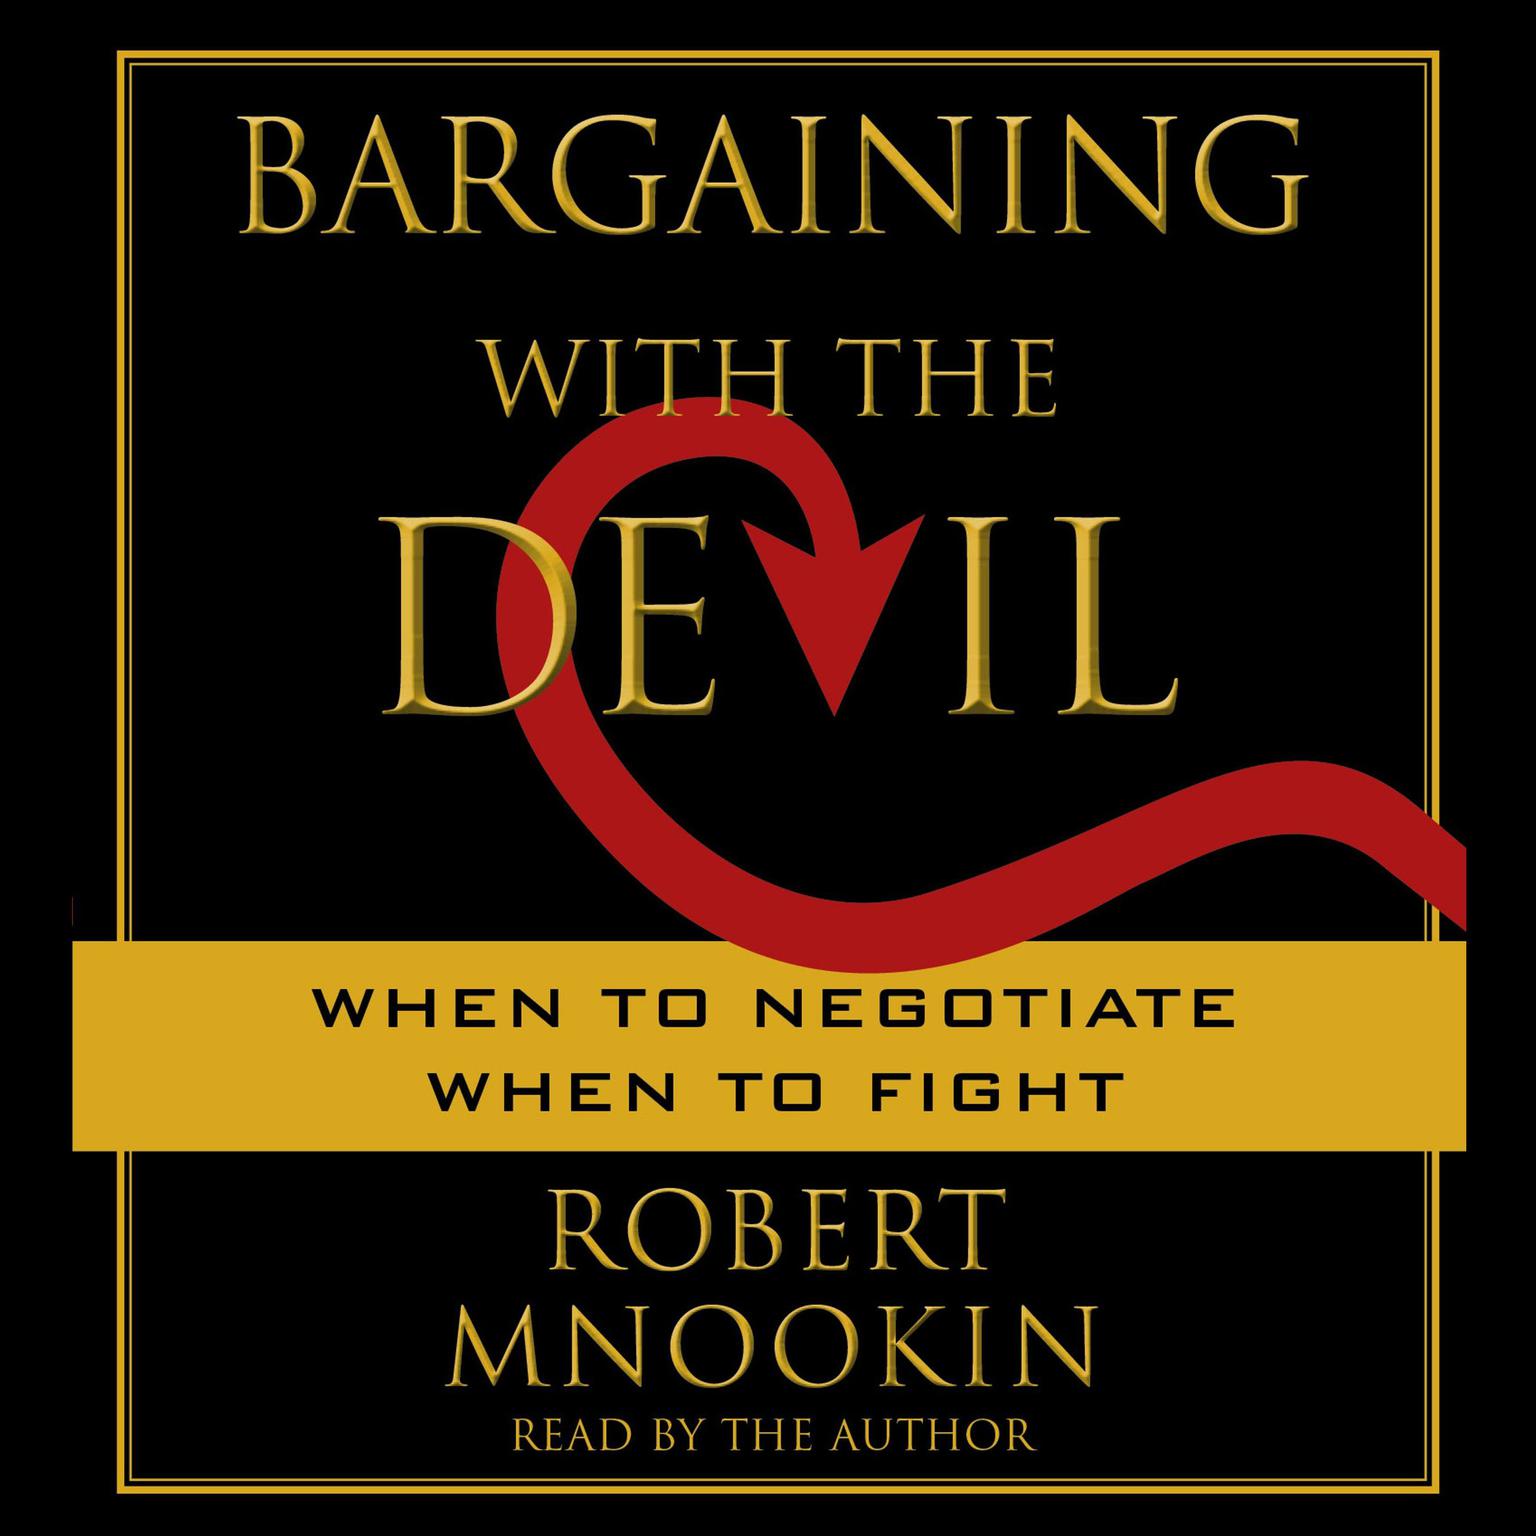 Bargaining with the Devil (Abridged): When to Negotiate, When to Fight Audiobook, by Robert Mnookin